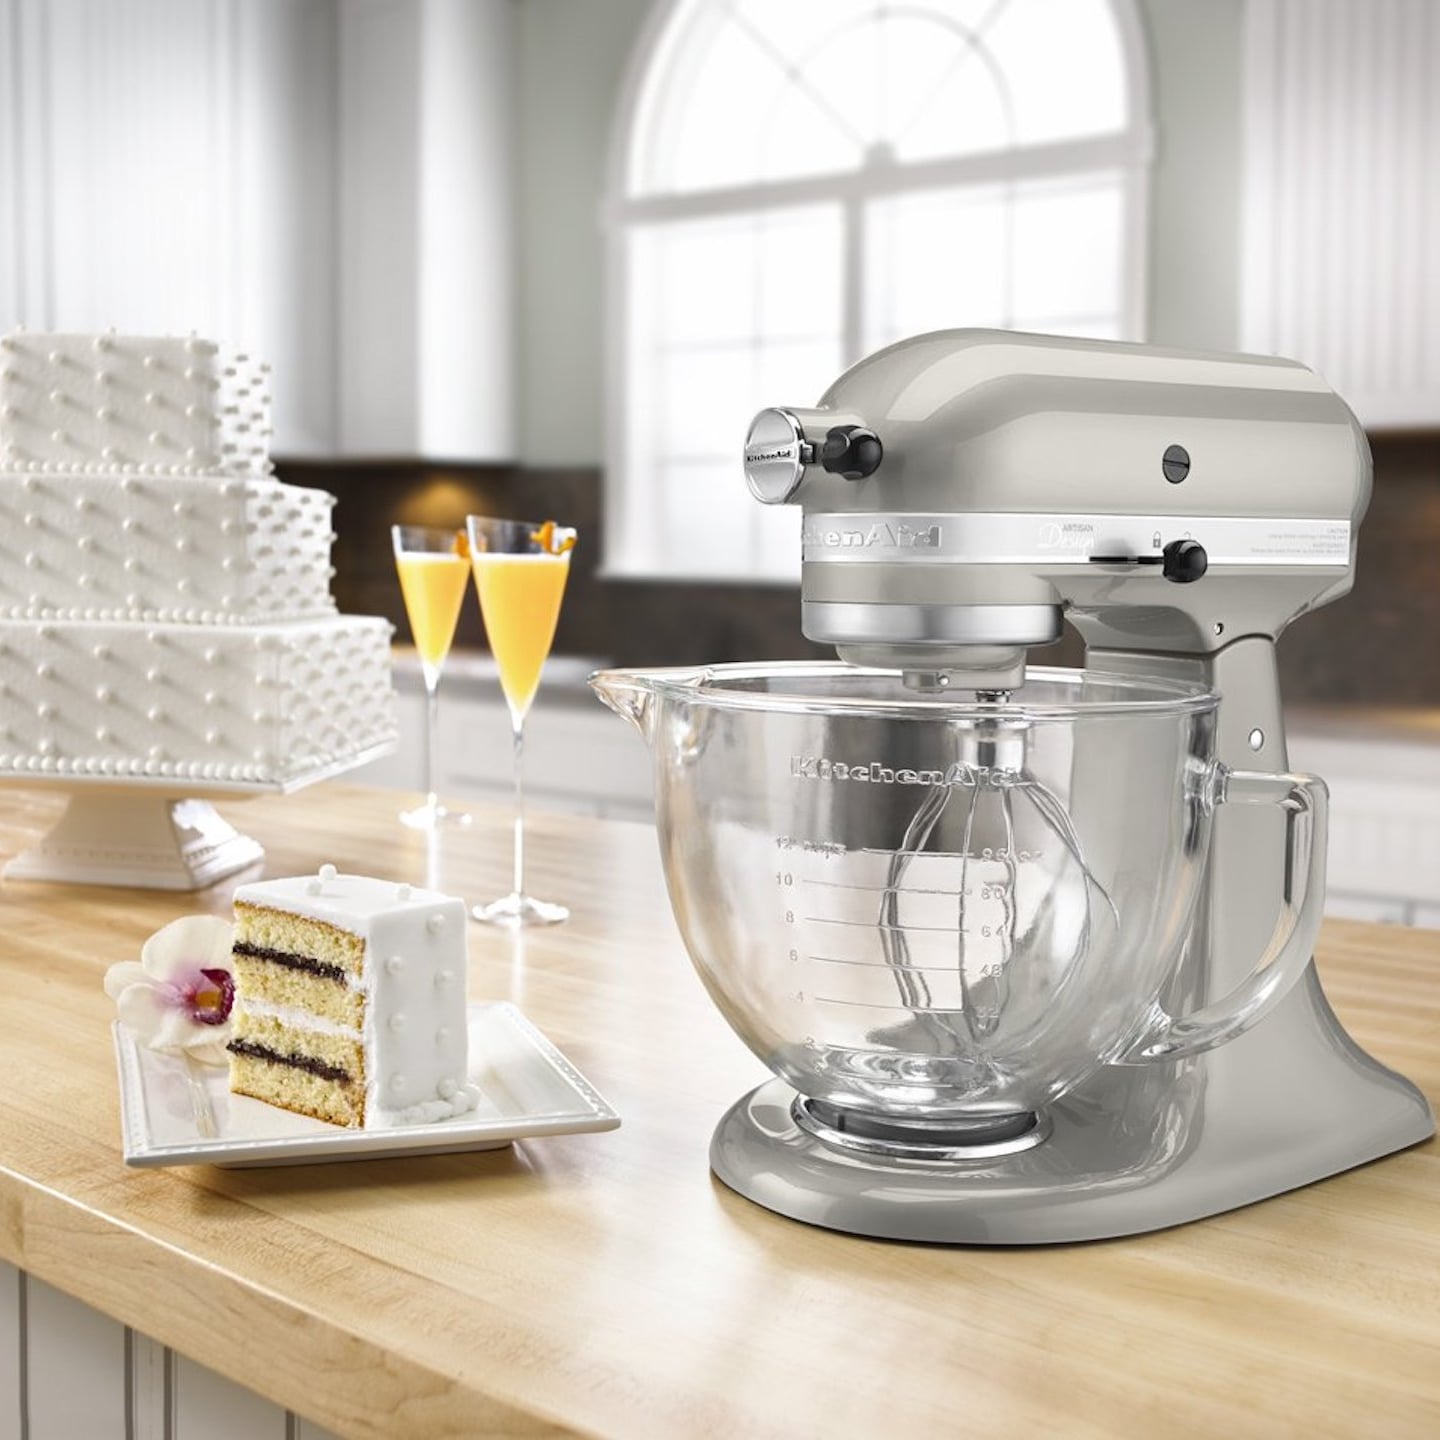 This KitchenAid stand mixer is discounted for Prime Day